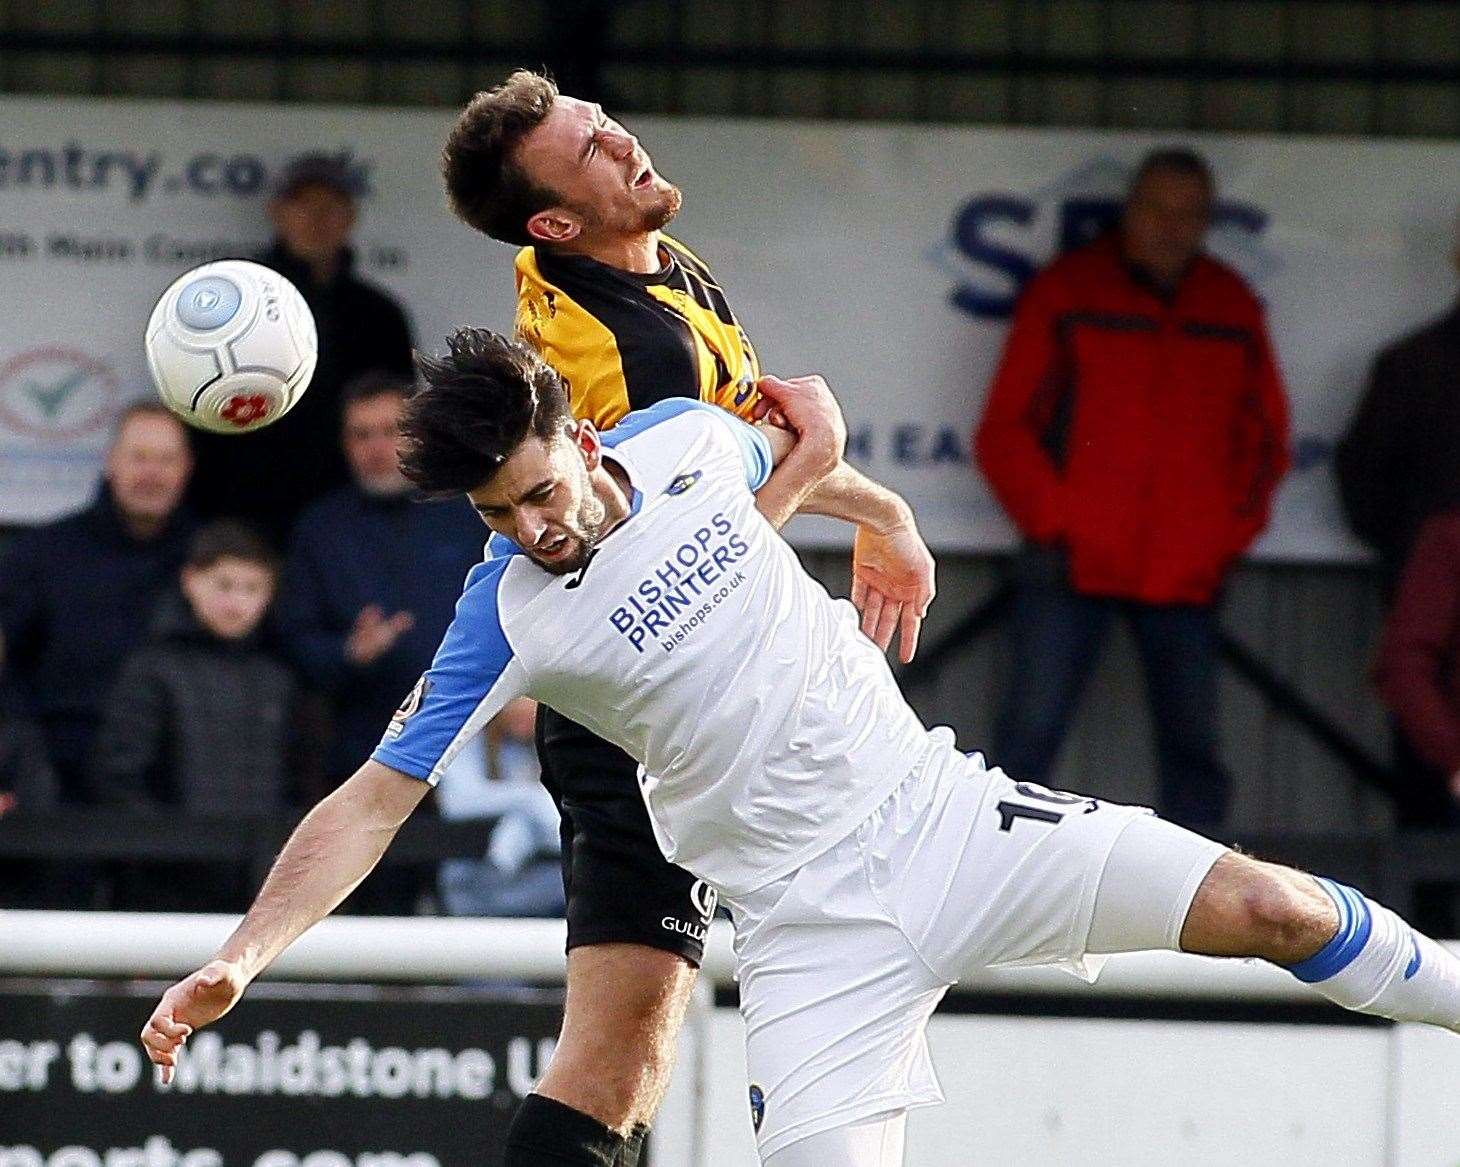 Will De Havilland goes up with former Maidstone team-mate Joe Quigley Picture: Sean Aidan